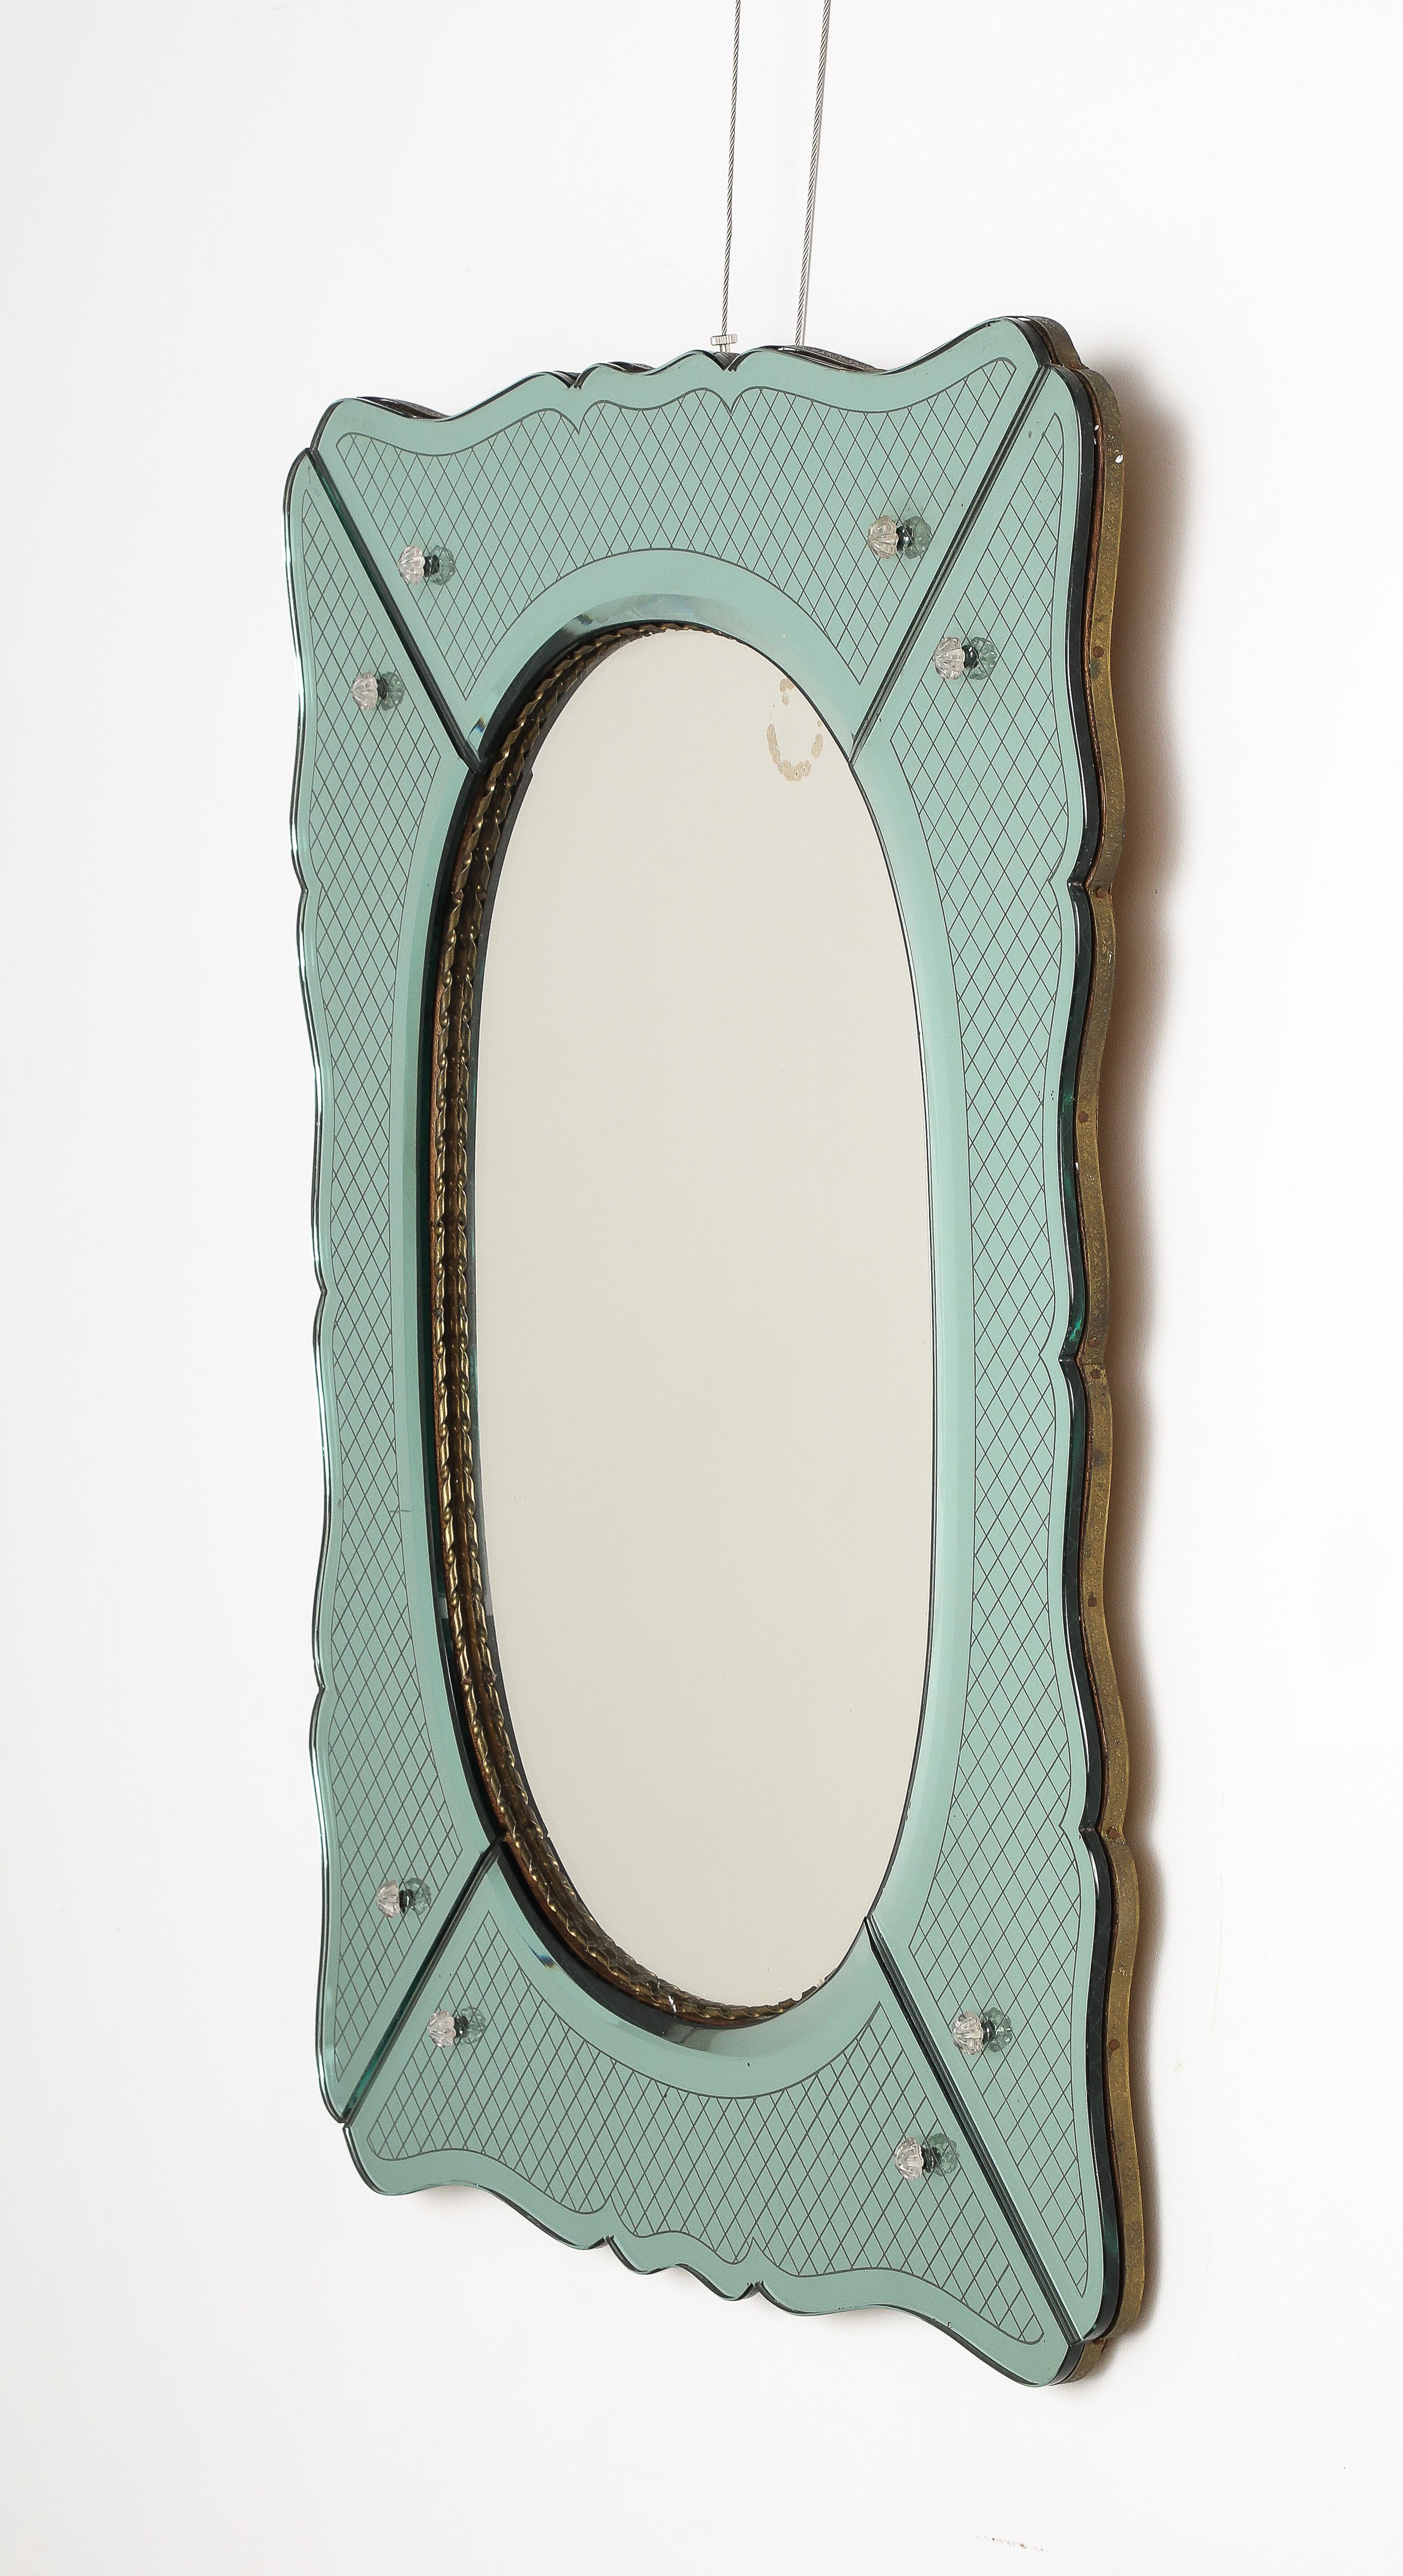 A Pietro Chiesa for Fontana Arte etched glass mirror in a stunning aqua color. The scalloped shaped form is segmented with etched glass motif and decorated with crystal rosettes.  The inner oval mirror plate is surrounded by a braided brass molded